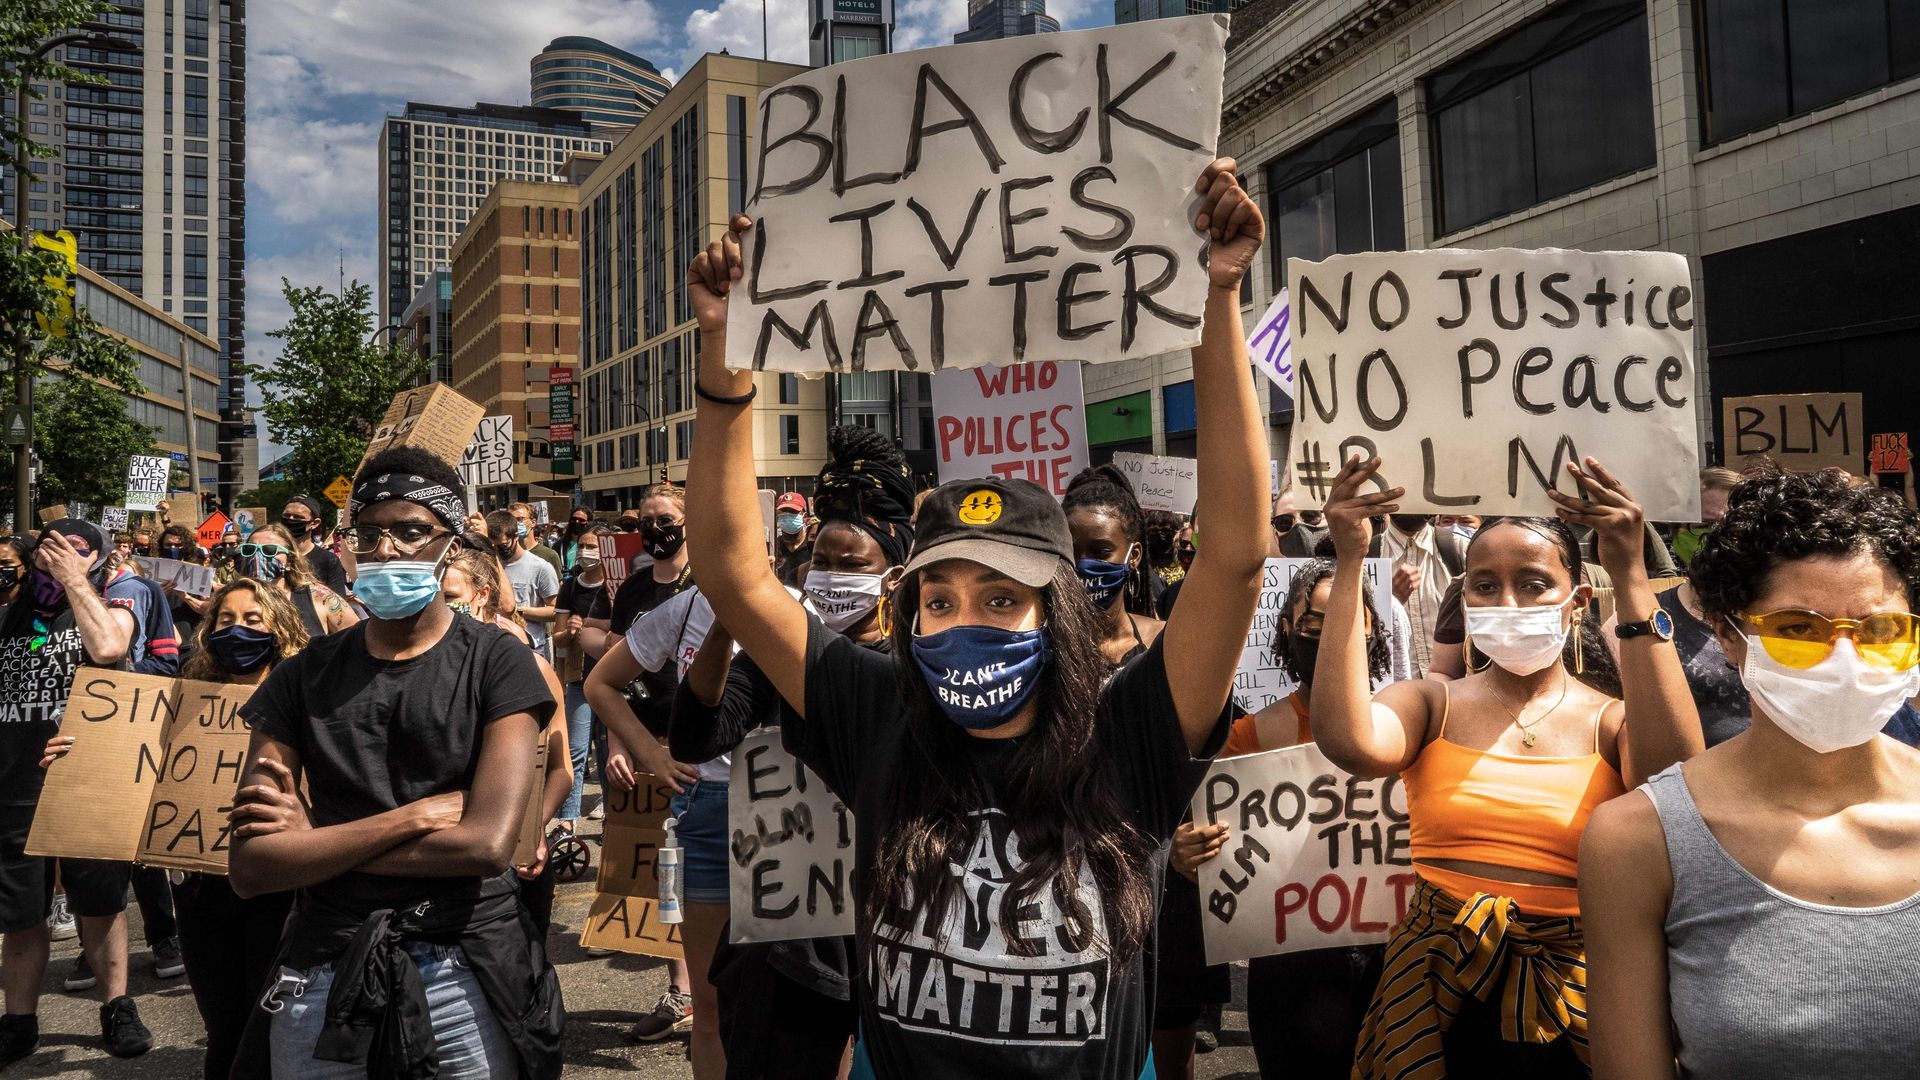 Protesters hold signs outside the Minneapolis 1st Police precinct during a demonstration against police brutality and racism on June 13, 2020 in Minneapolis, Minnesota